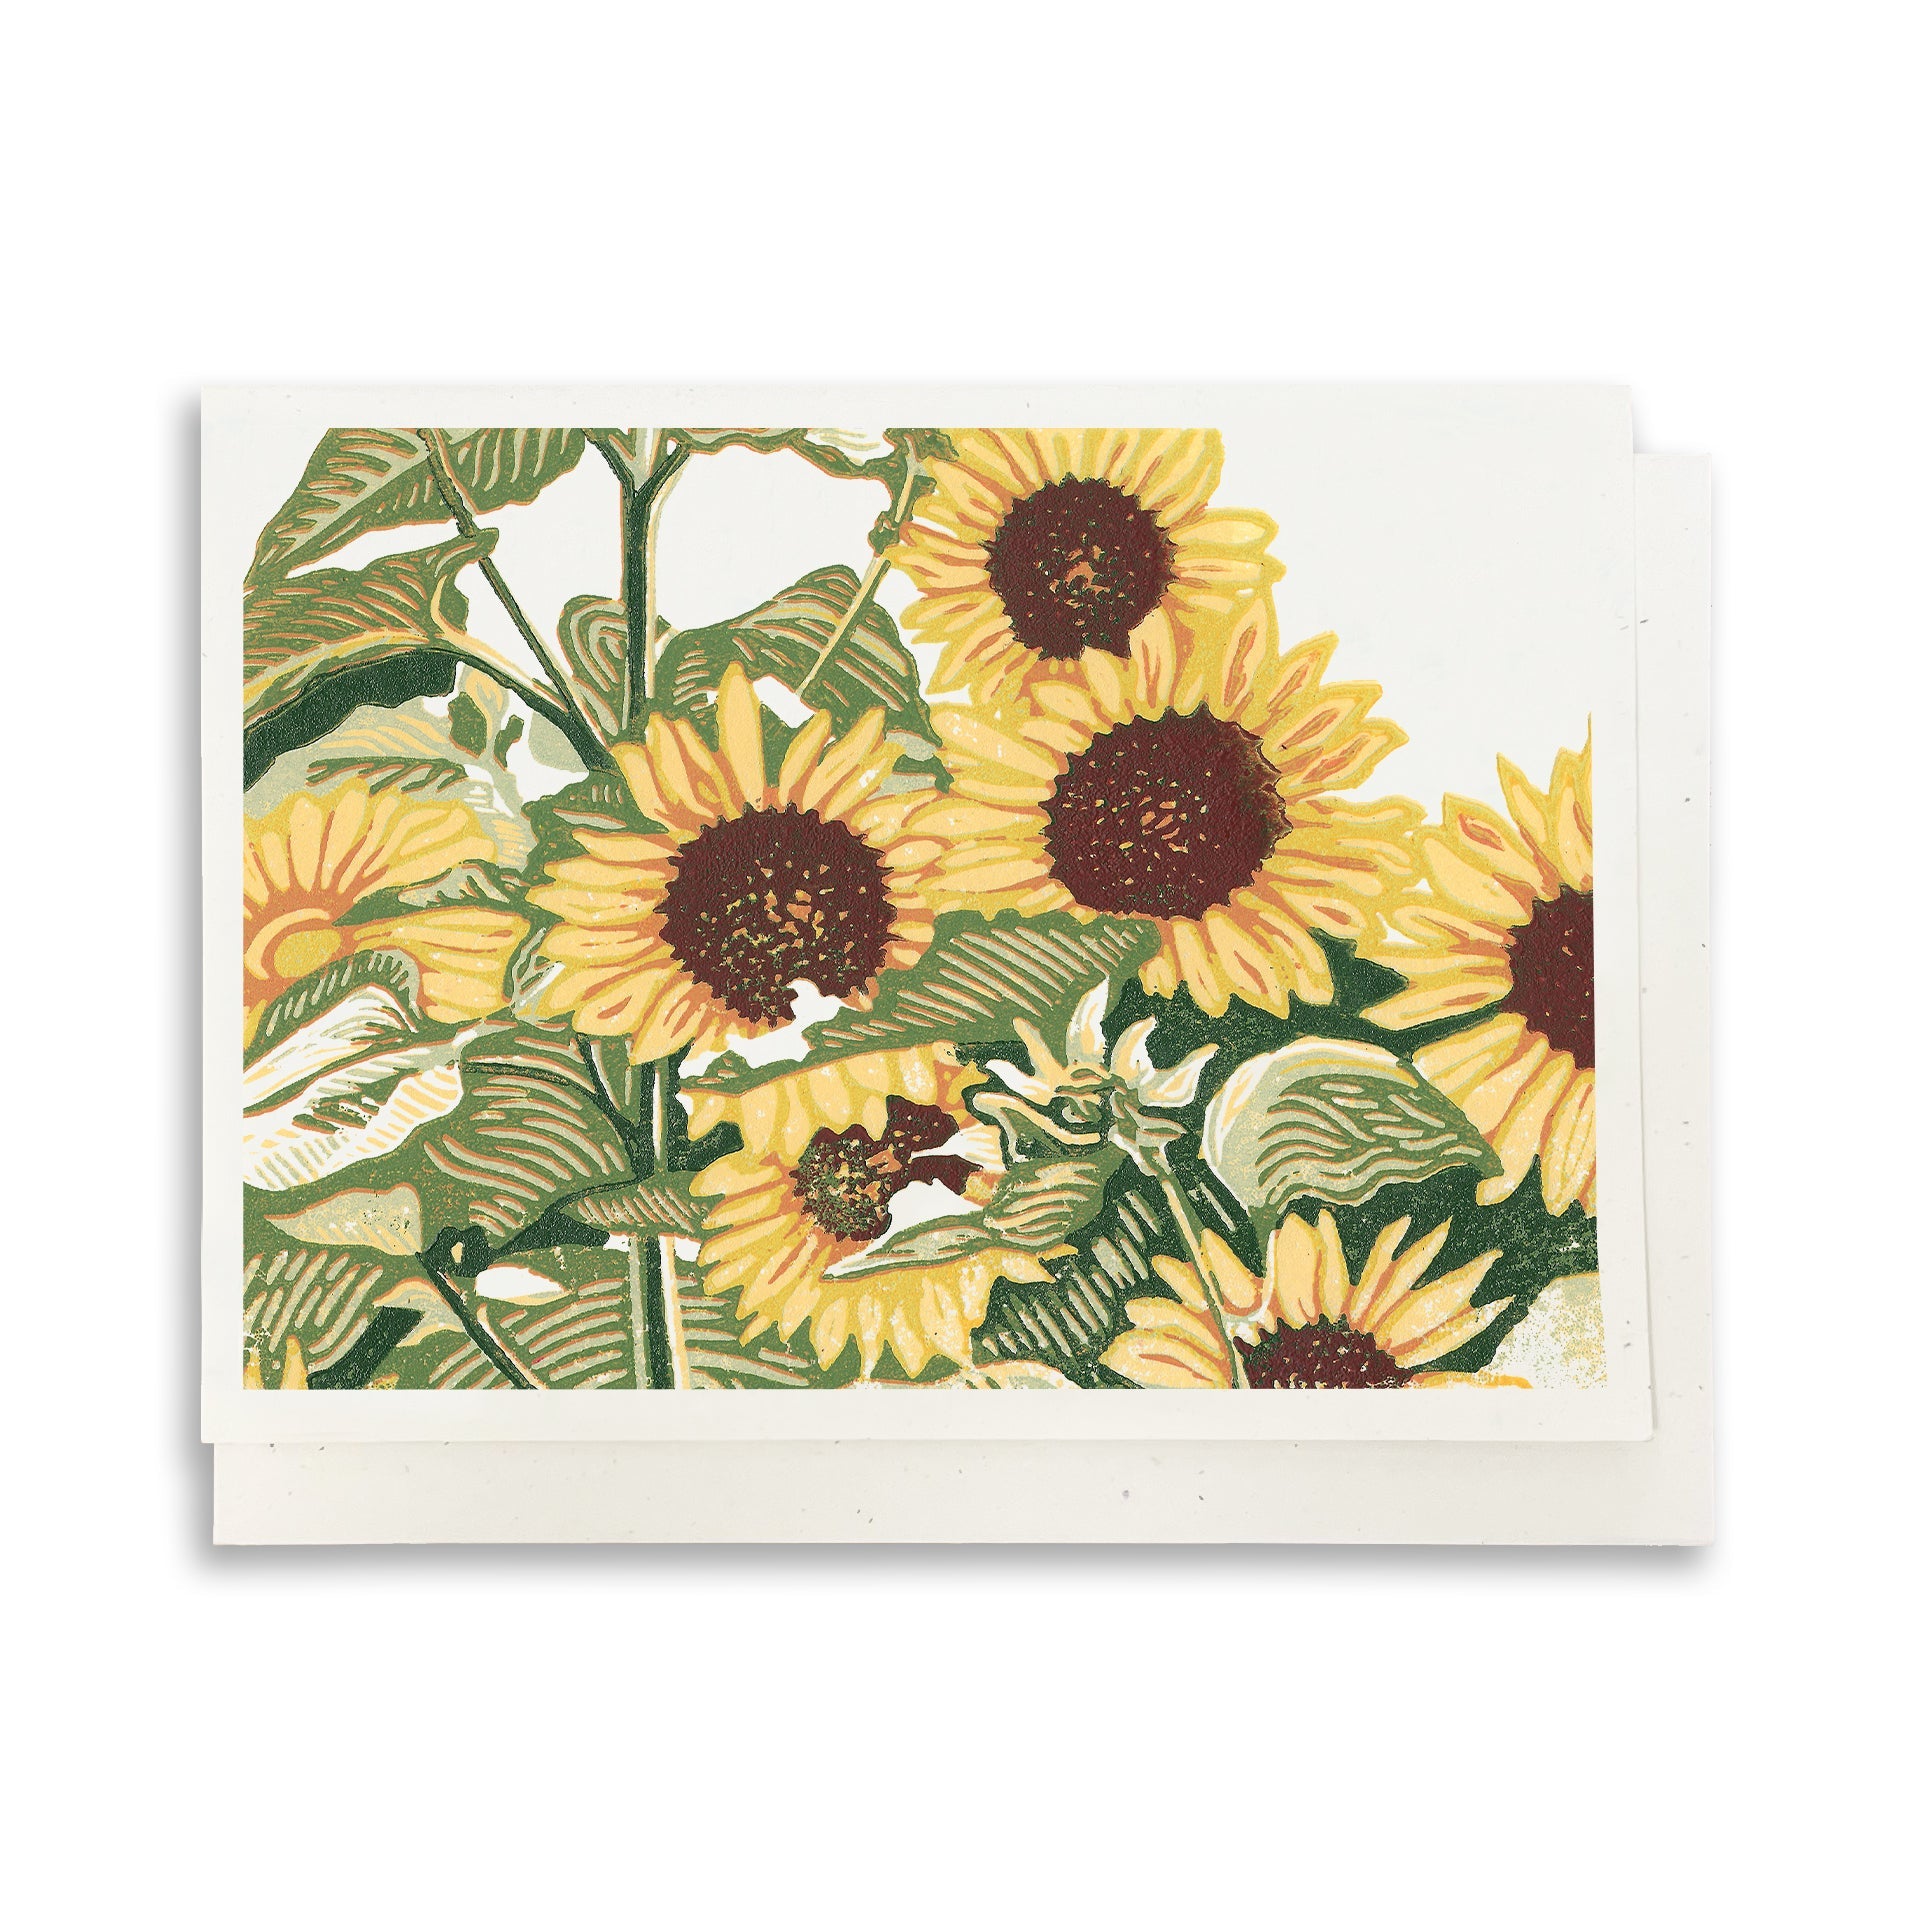 A casually elegant card featuring a digital reproductions of Natalia Wohletz's block print design titled Sunflower Patch.